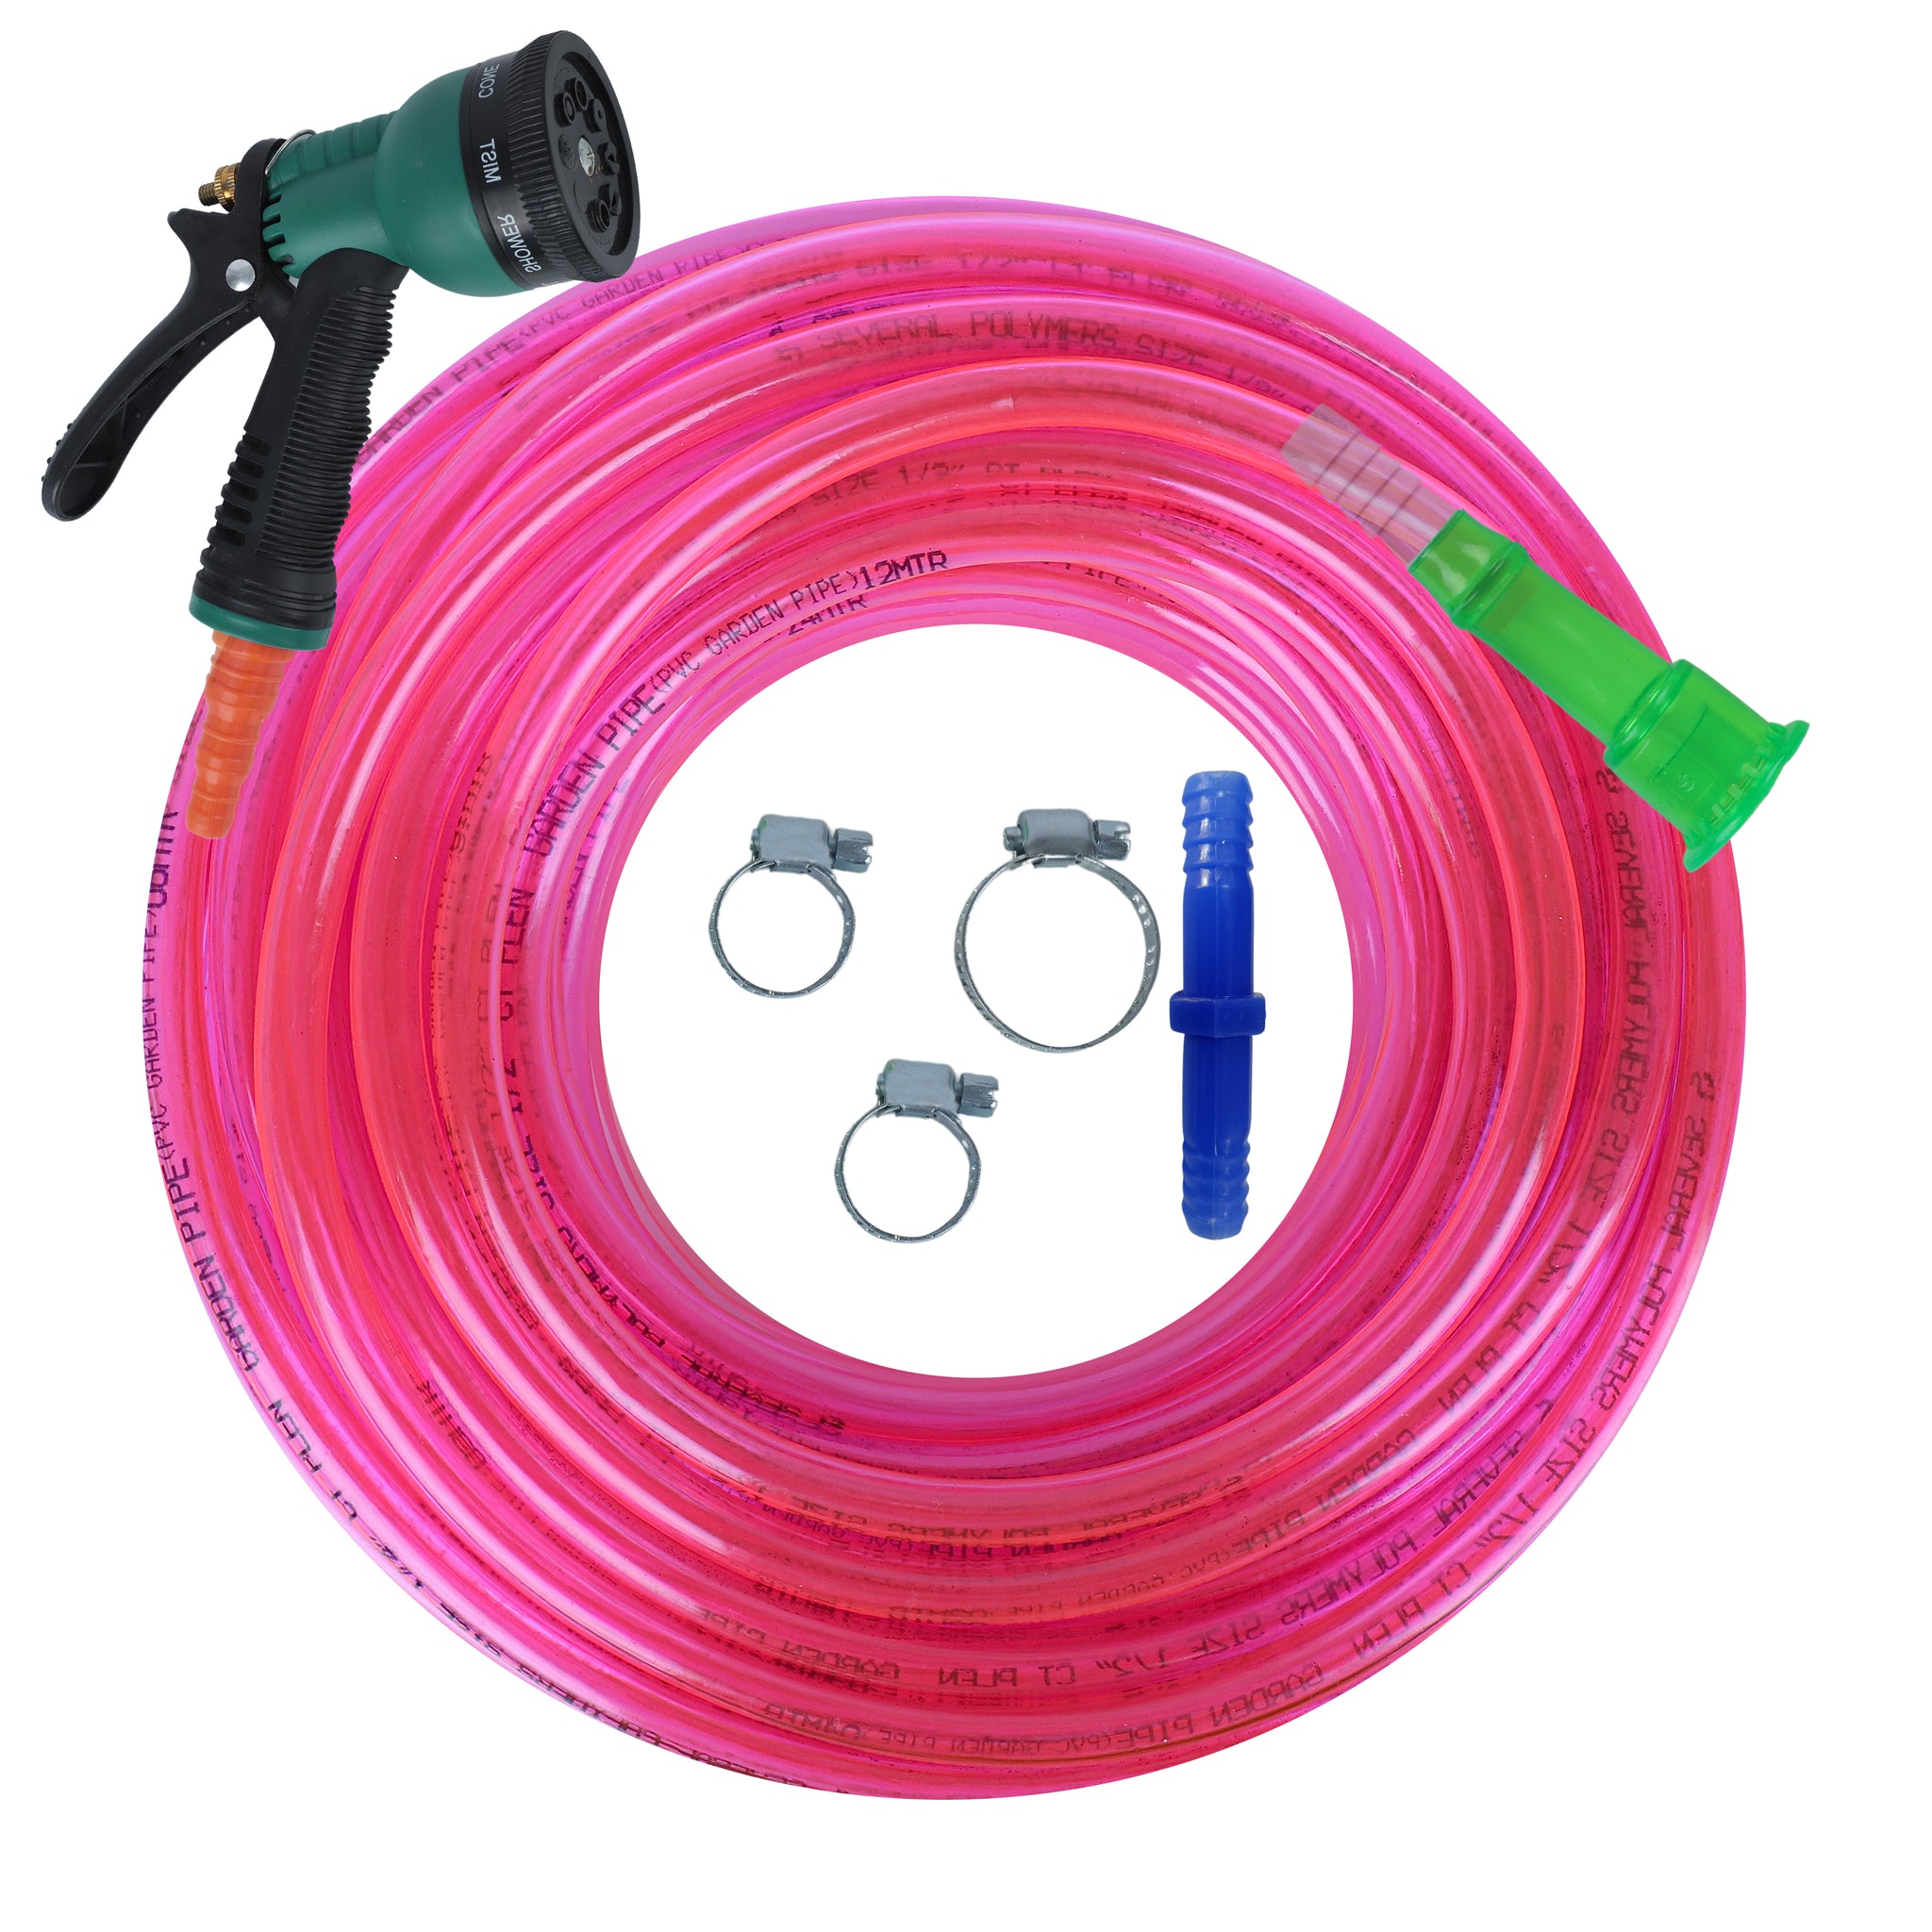 Utkarsh PVC Colour Transparent Garden Water Hose Pipe (Size: 1/2") with 8 Pattern Nozzle Sprayer, 1 Tap Adapter, Connector & 3 Clamps for Garden, Car Wash, Floor Clean, Pet Bath, Easy to Connect Indoor/Outdoor Use (Multicolour)